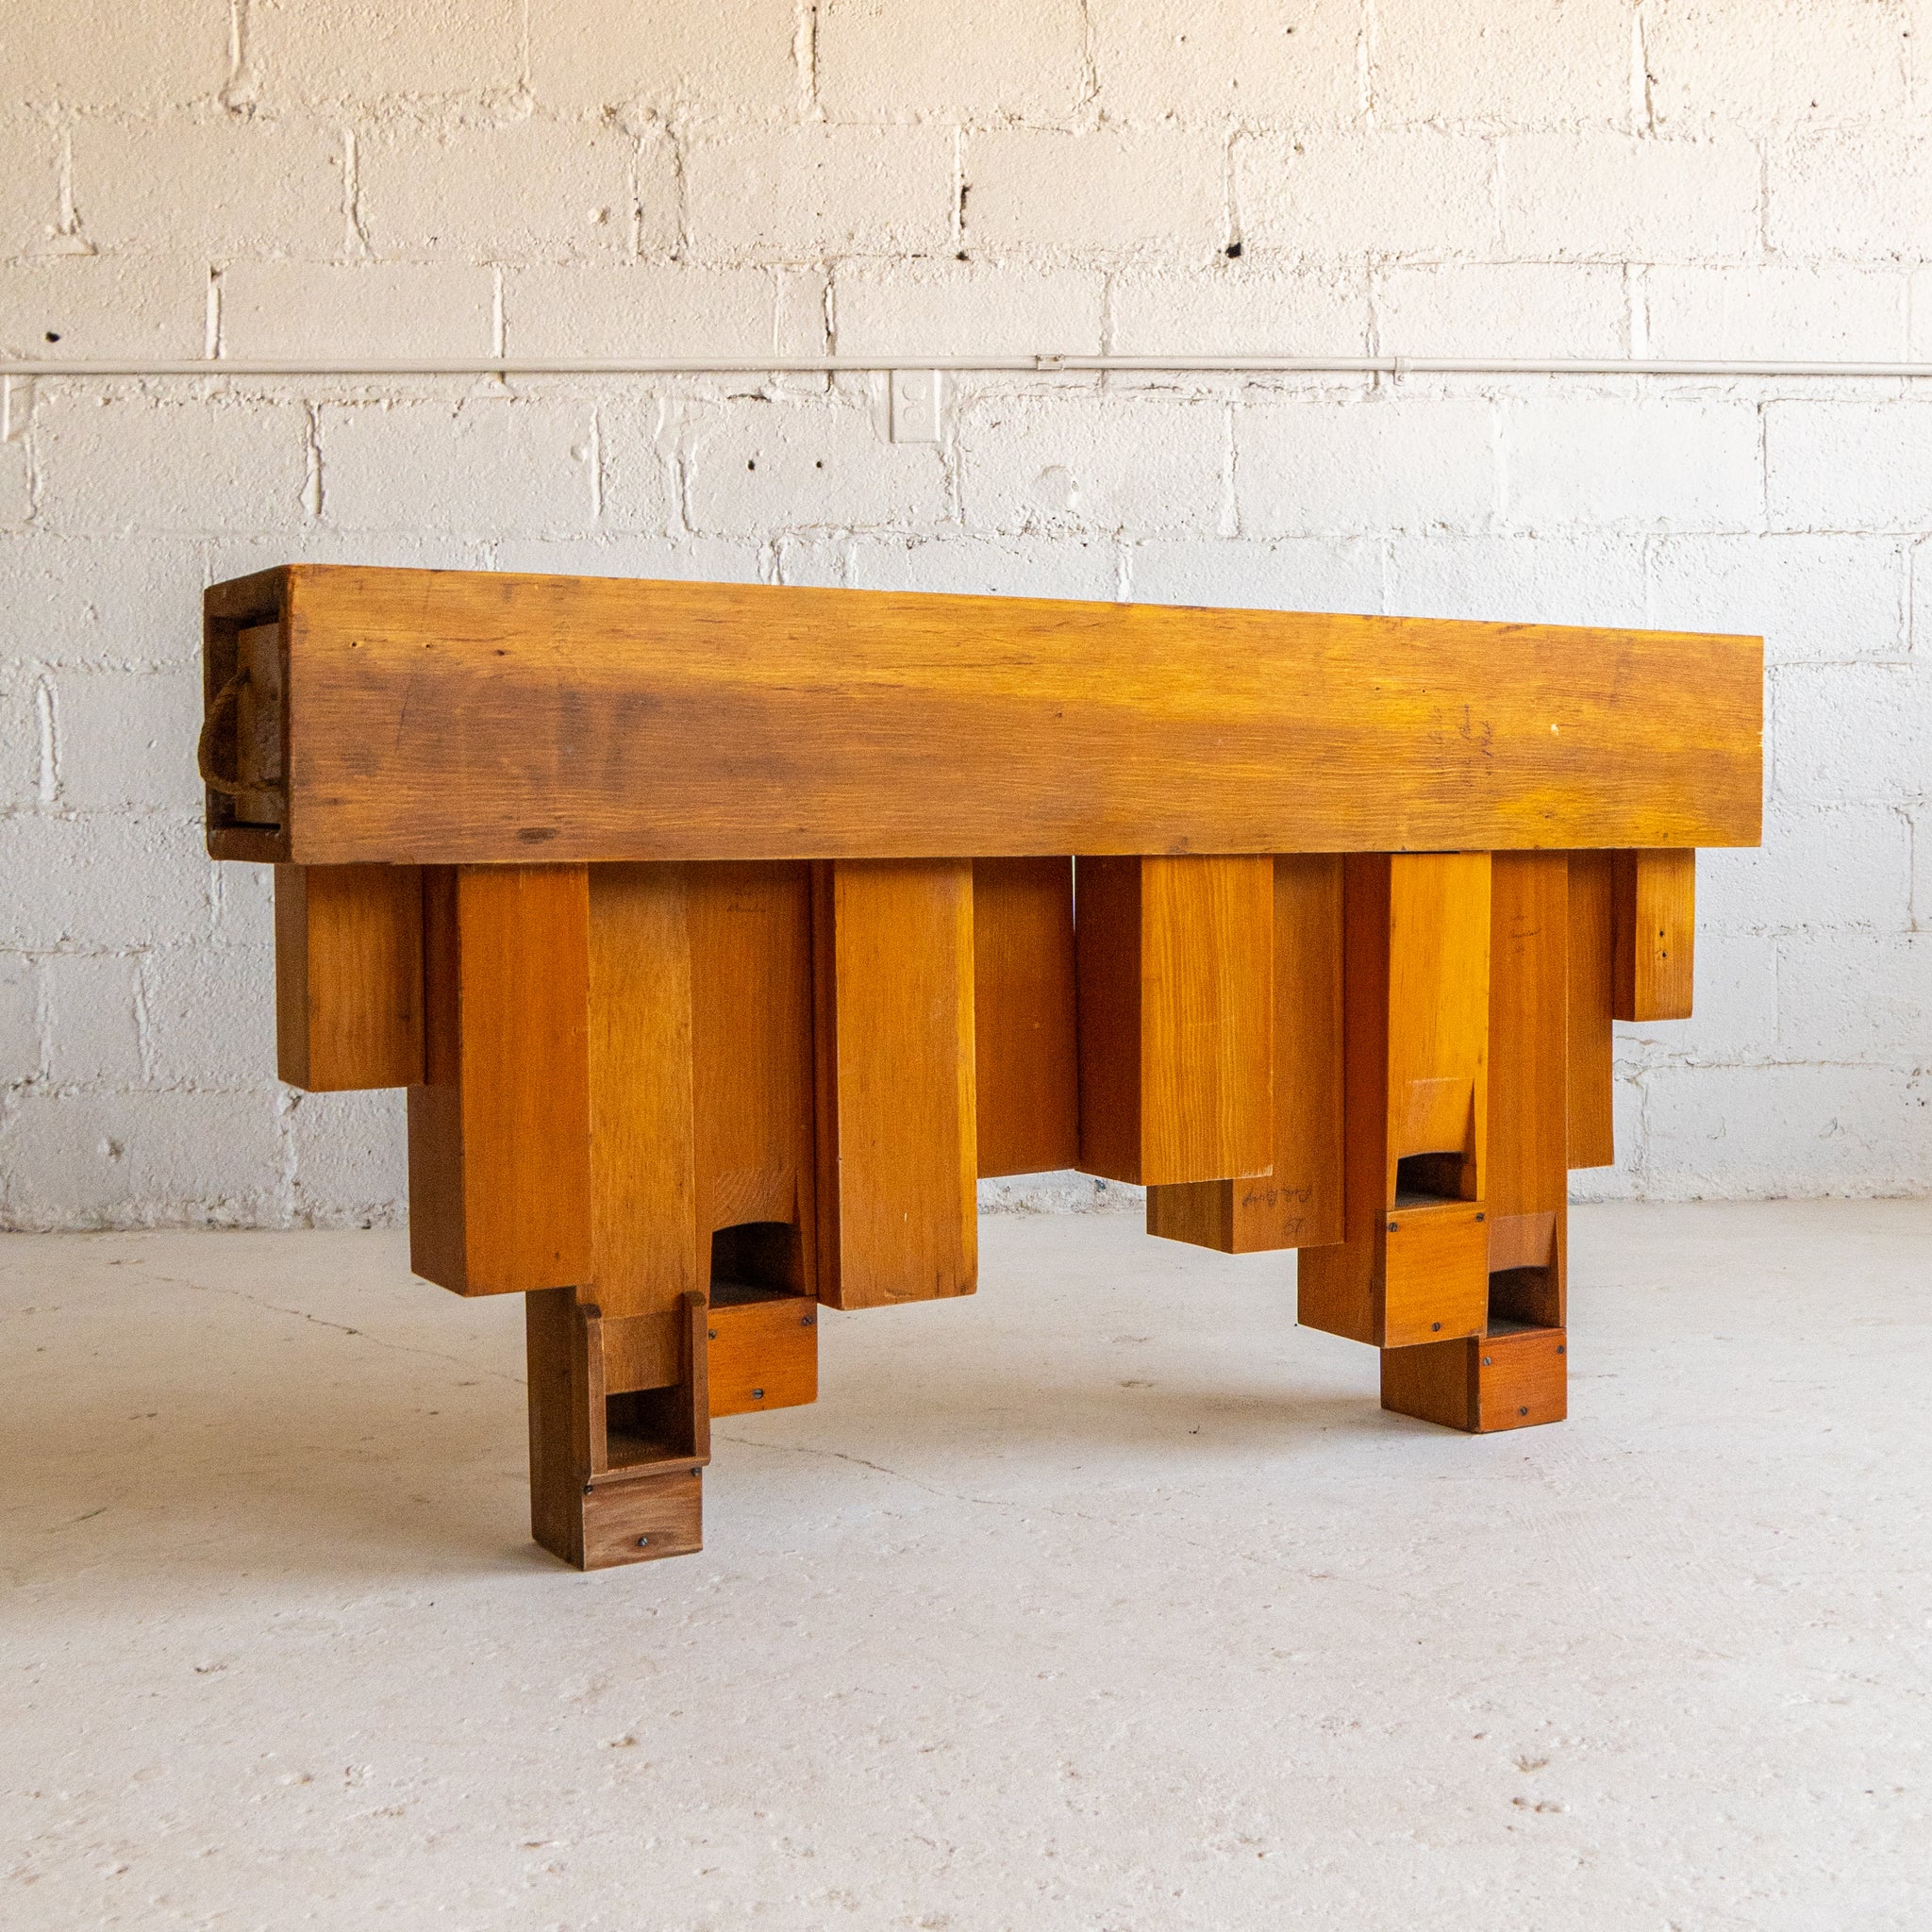 pipe organ entry table 5 full view reclaimed wood pine